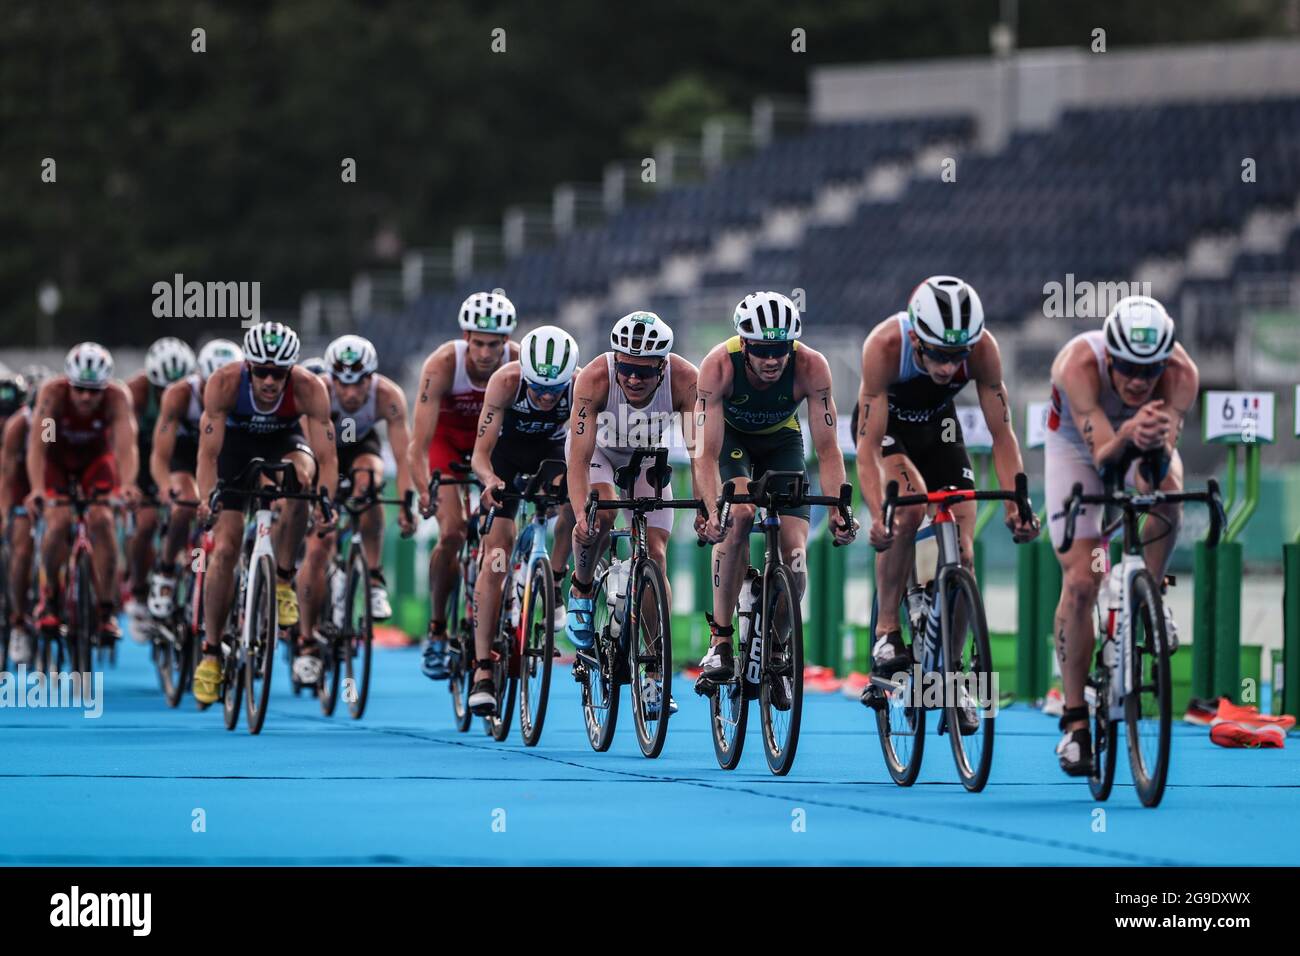 Tokyo, Japan. 26th July, 2021. Athletes compete during the triathlon men's individual final at the Tokyo Olympic Games in Tokyo, Japan, on July 26, 2021. Credit: Pan Yulong/Xinhua/Alamy Live News Stock Photo